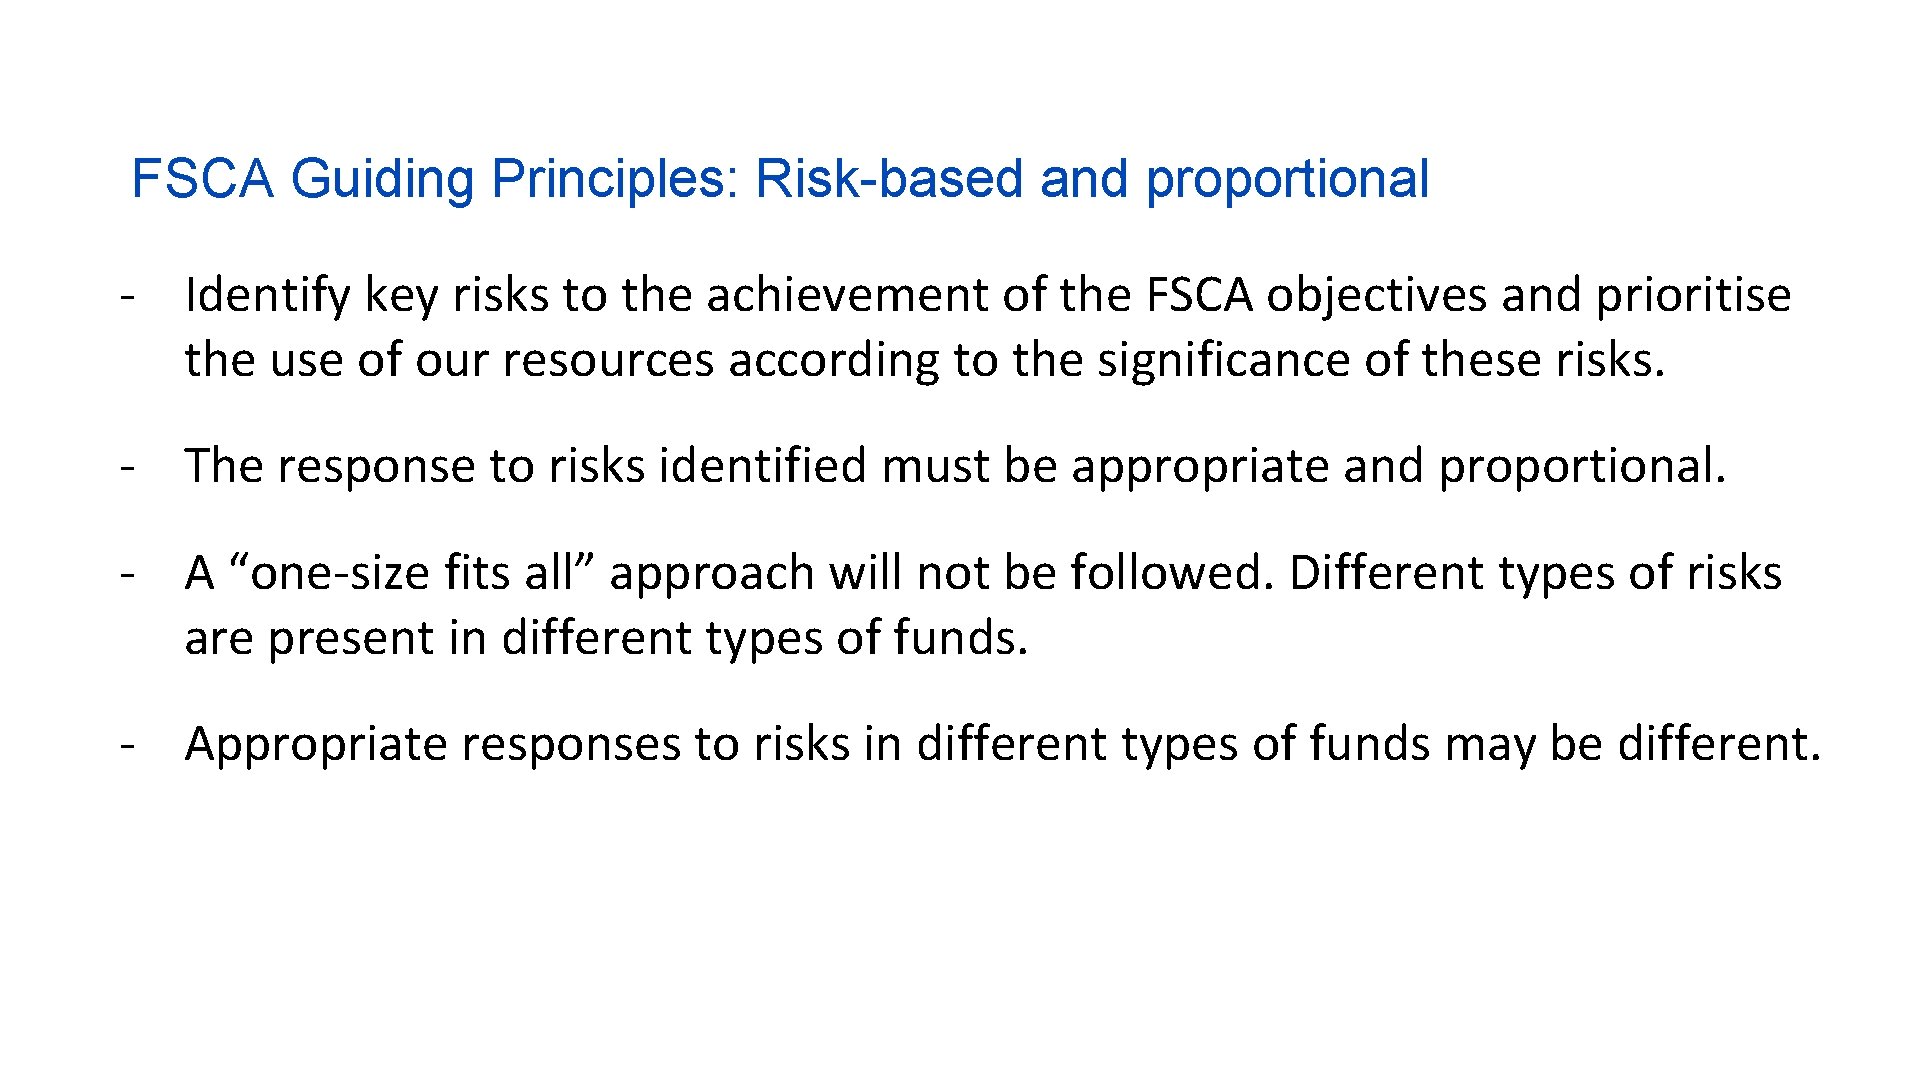 FSCA Guiding Principles: Risk-based and proportional - Identify key risks to the achievement of